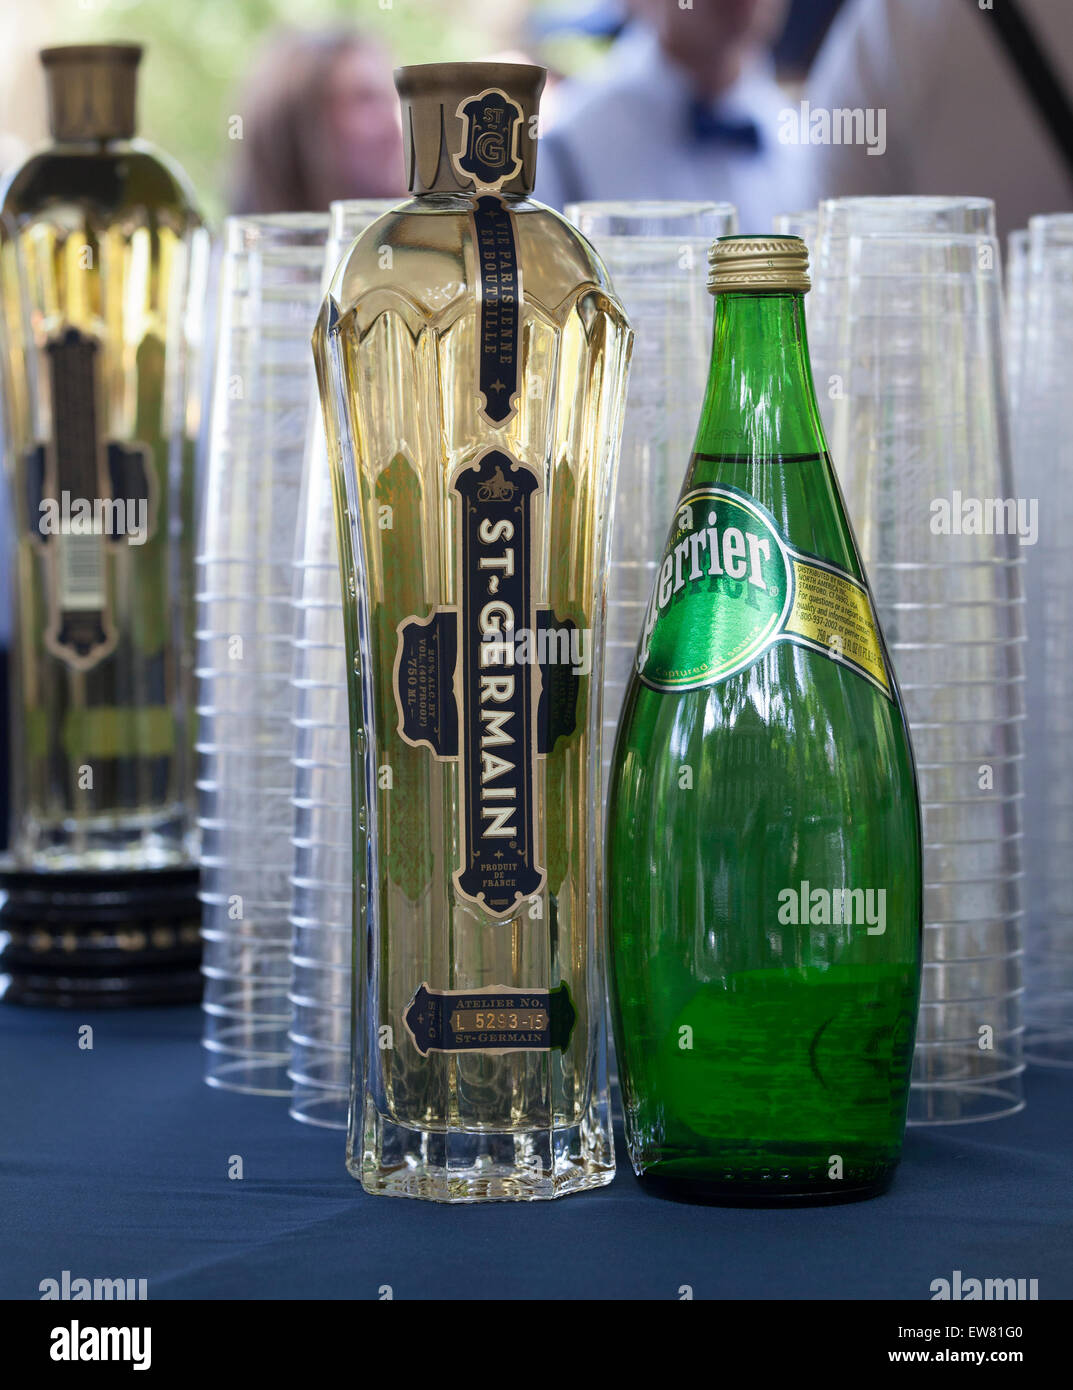 New York, NY - June 14, 2015: St. Germain liquor & Perrier water on display at 10th annual Jazz Age lawn party by Michael Arenella & Dreamland Orchestra on Governors Island Stock Photo